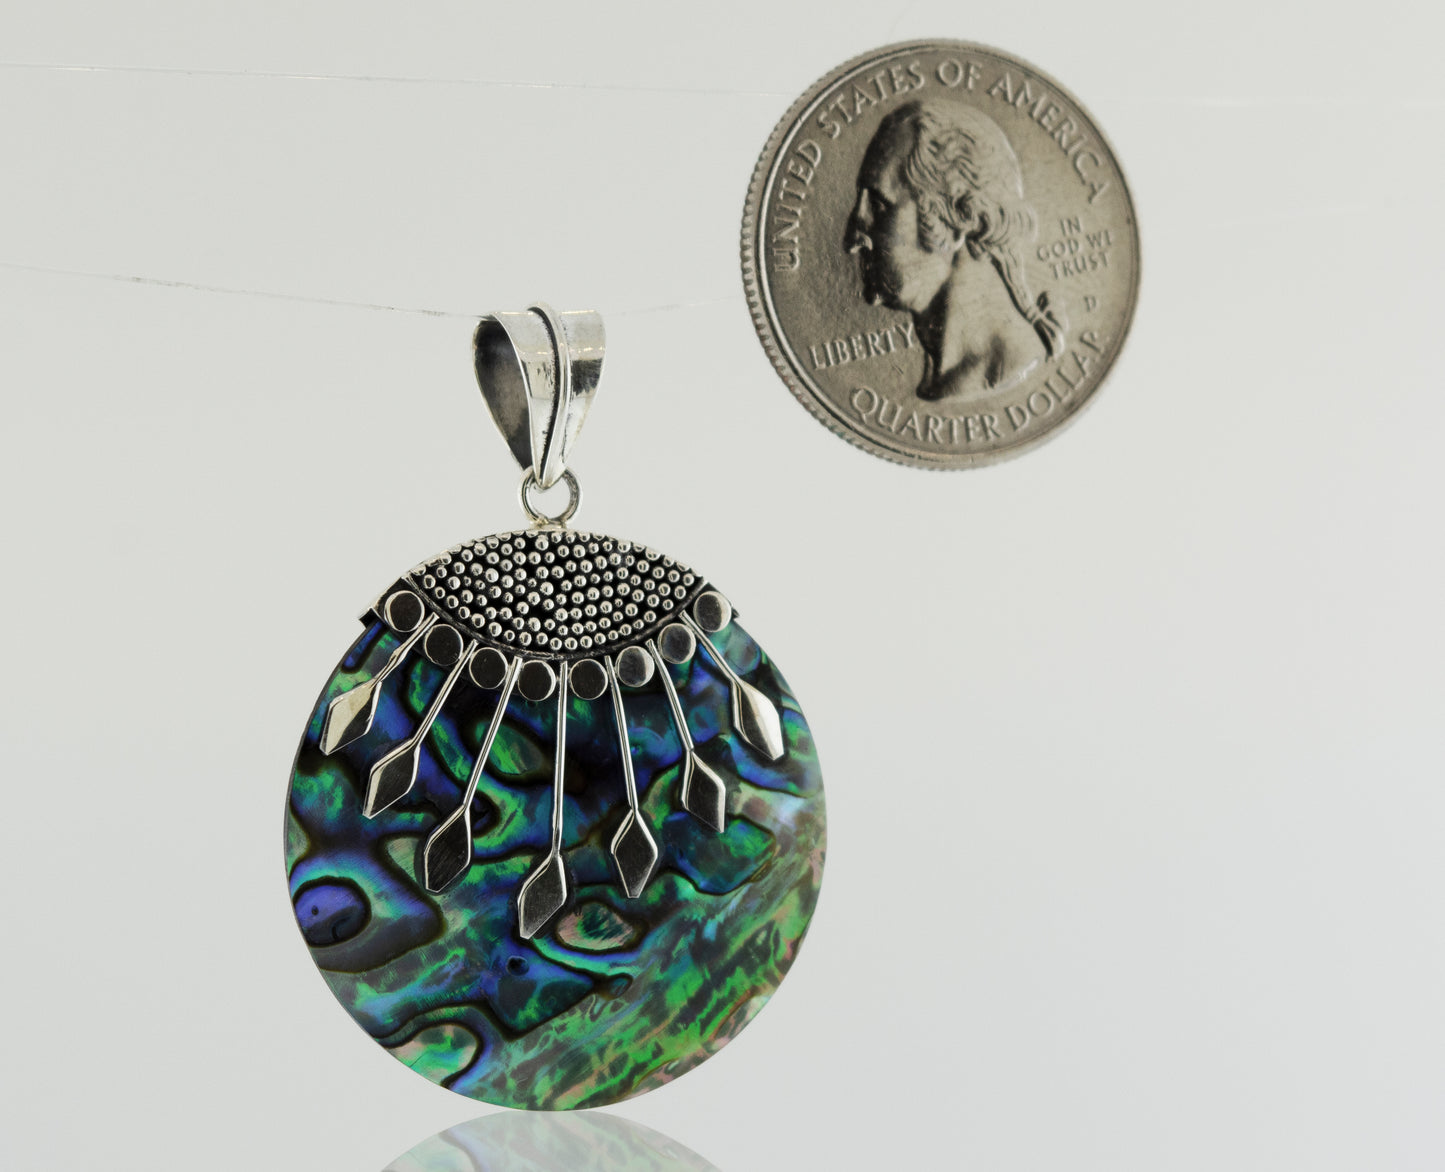 A Circle Abalone Pendant with intricate Bali detail, made of .925 Sterling Silver, showcased next to a dime for scale.